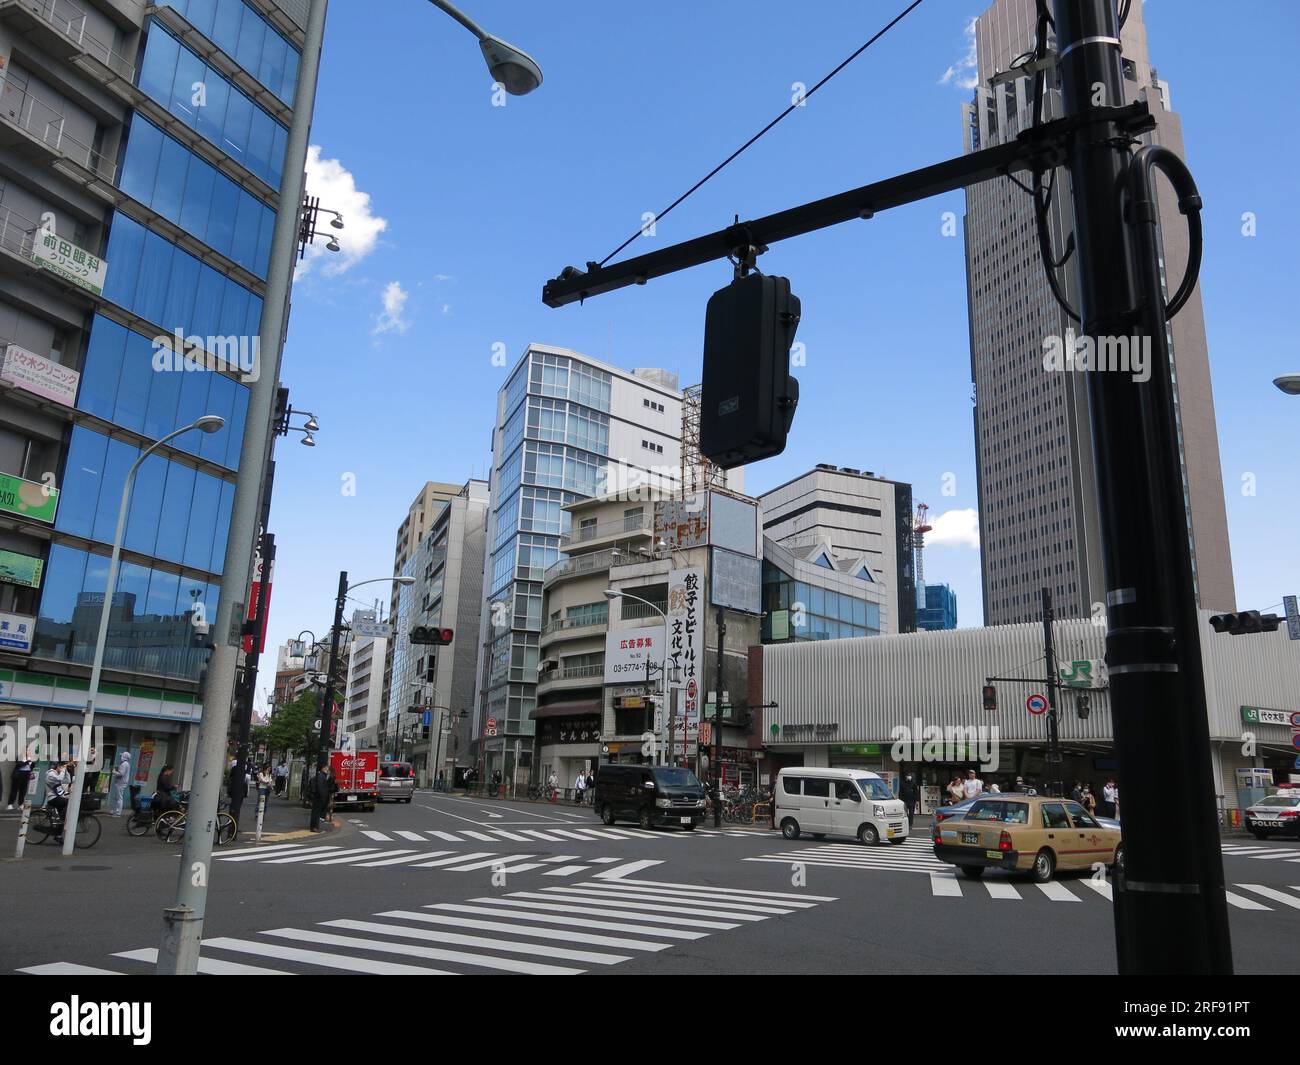 Street scene in Yoyogi, a suburb of wider Tokyo, showing a commercial district with tall buildings, pedestrian crossings & power lines across the road. Stock Photo